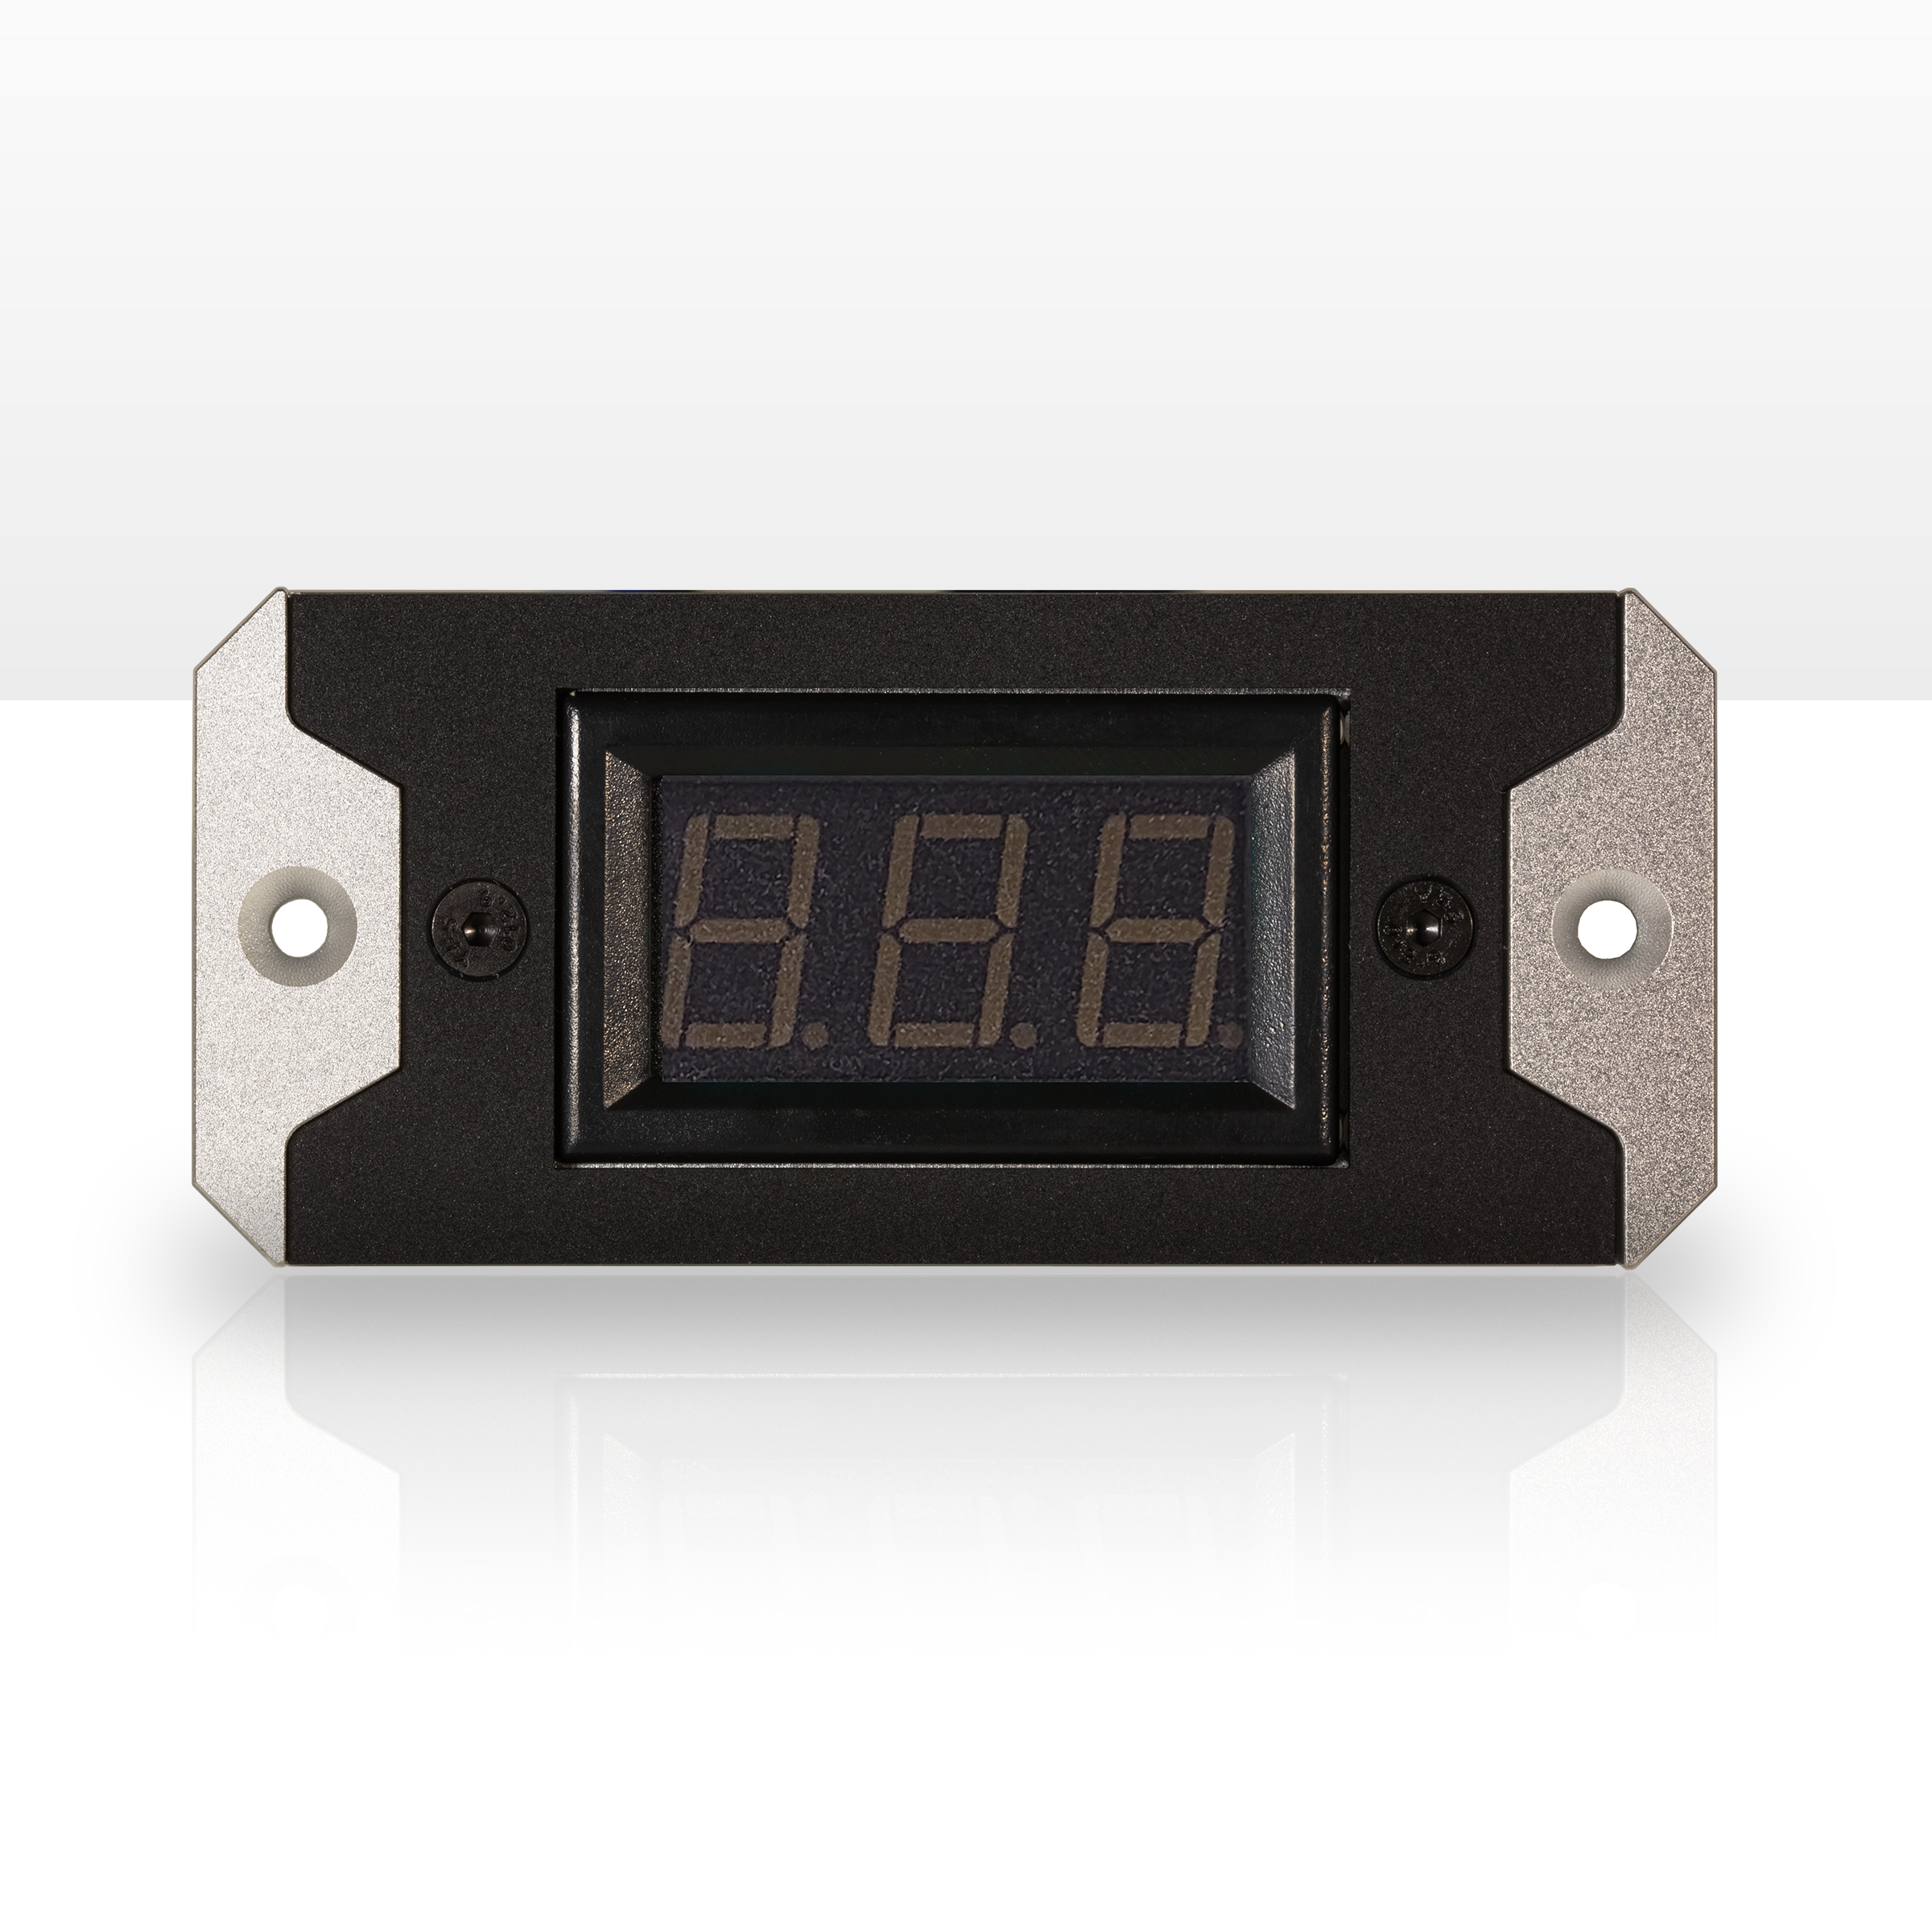 New Billet Aluminum Remote Display Ammeter for The Conductor